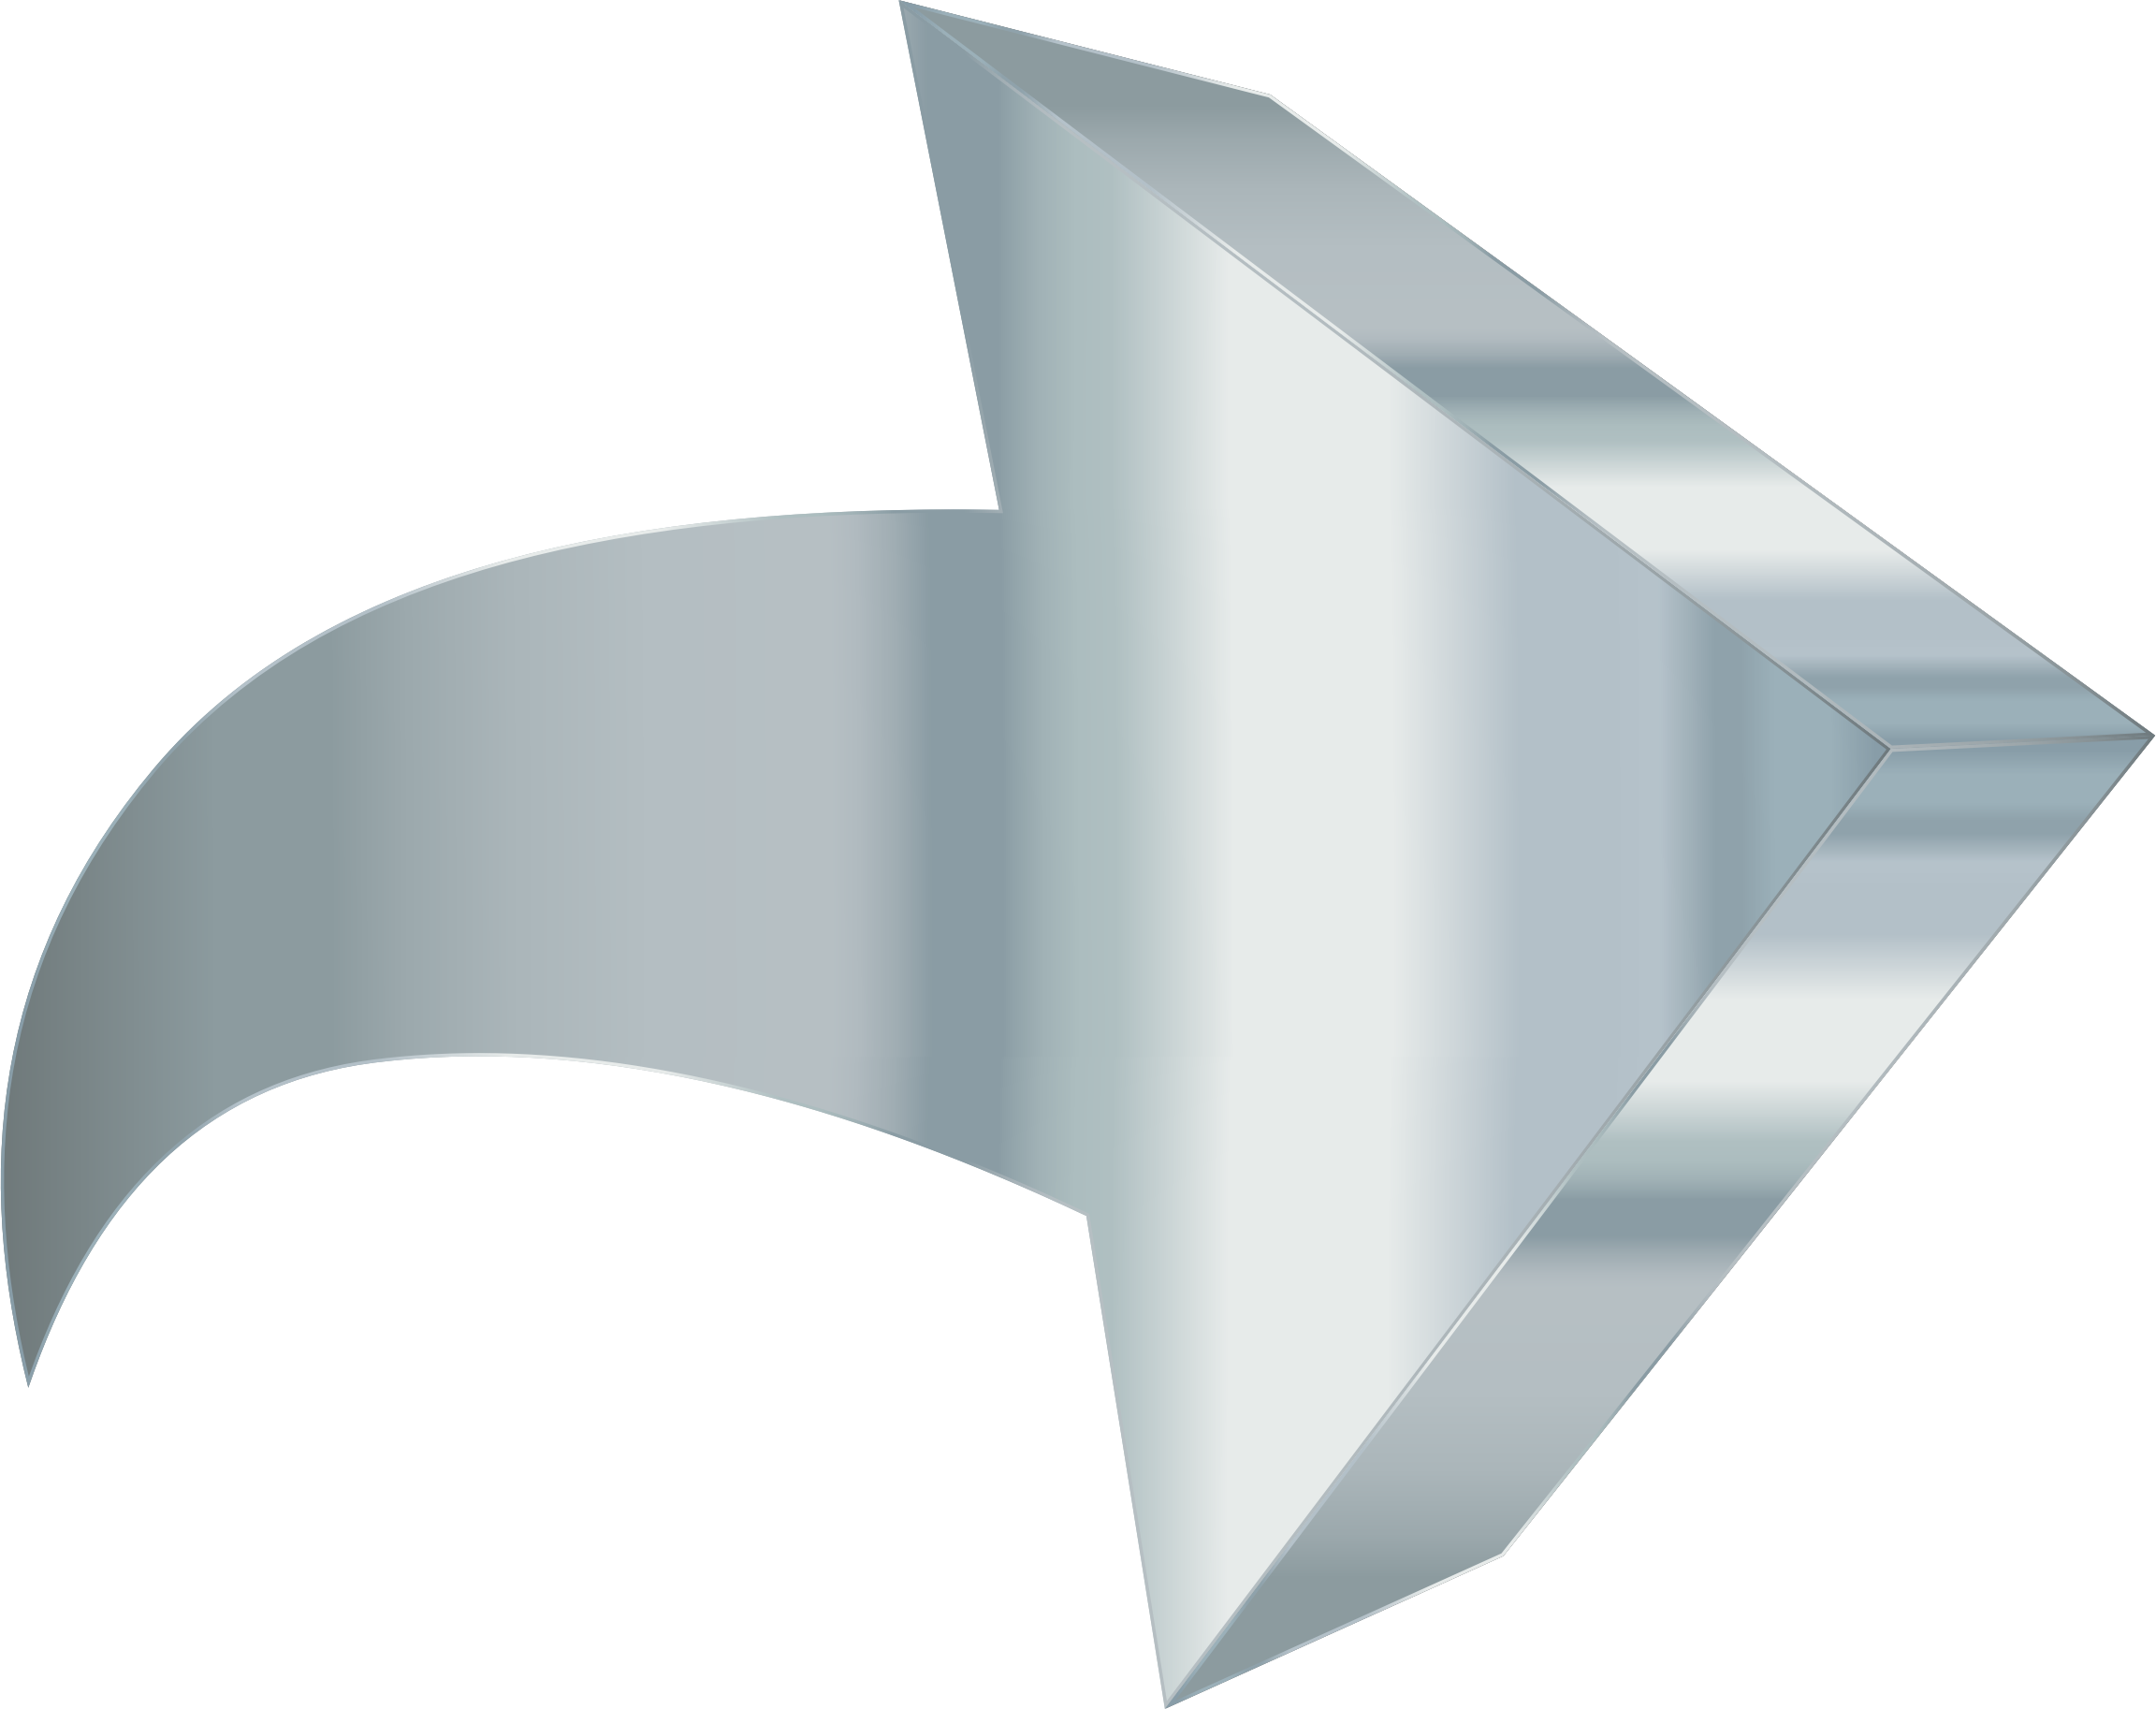 A Silver Arrow Pointing To The Left